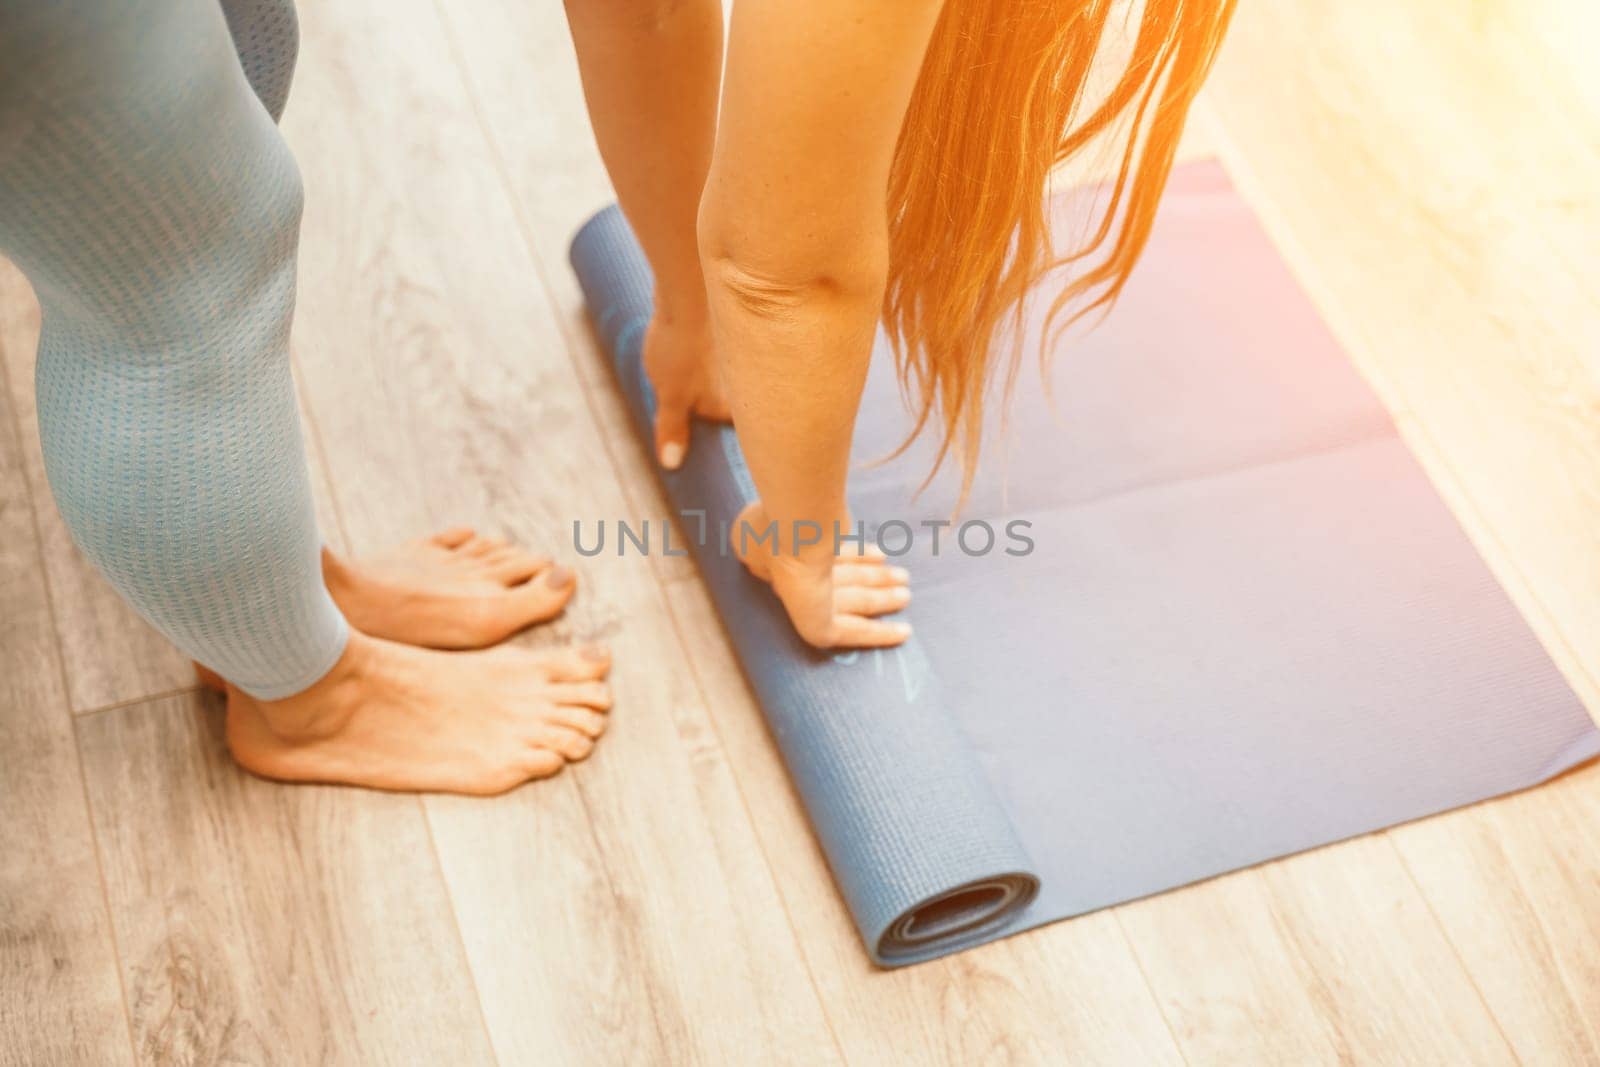 Woman hands rolled up yoga mat on gym floor in yoga fitness training room. Home workout woman close up hands rolling foam yoga gym mat. Woman barefoot home workout sportive healthy lifestyle concept by Matiunina